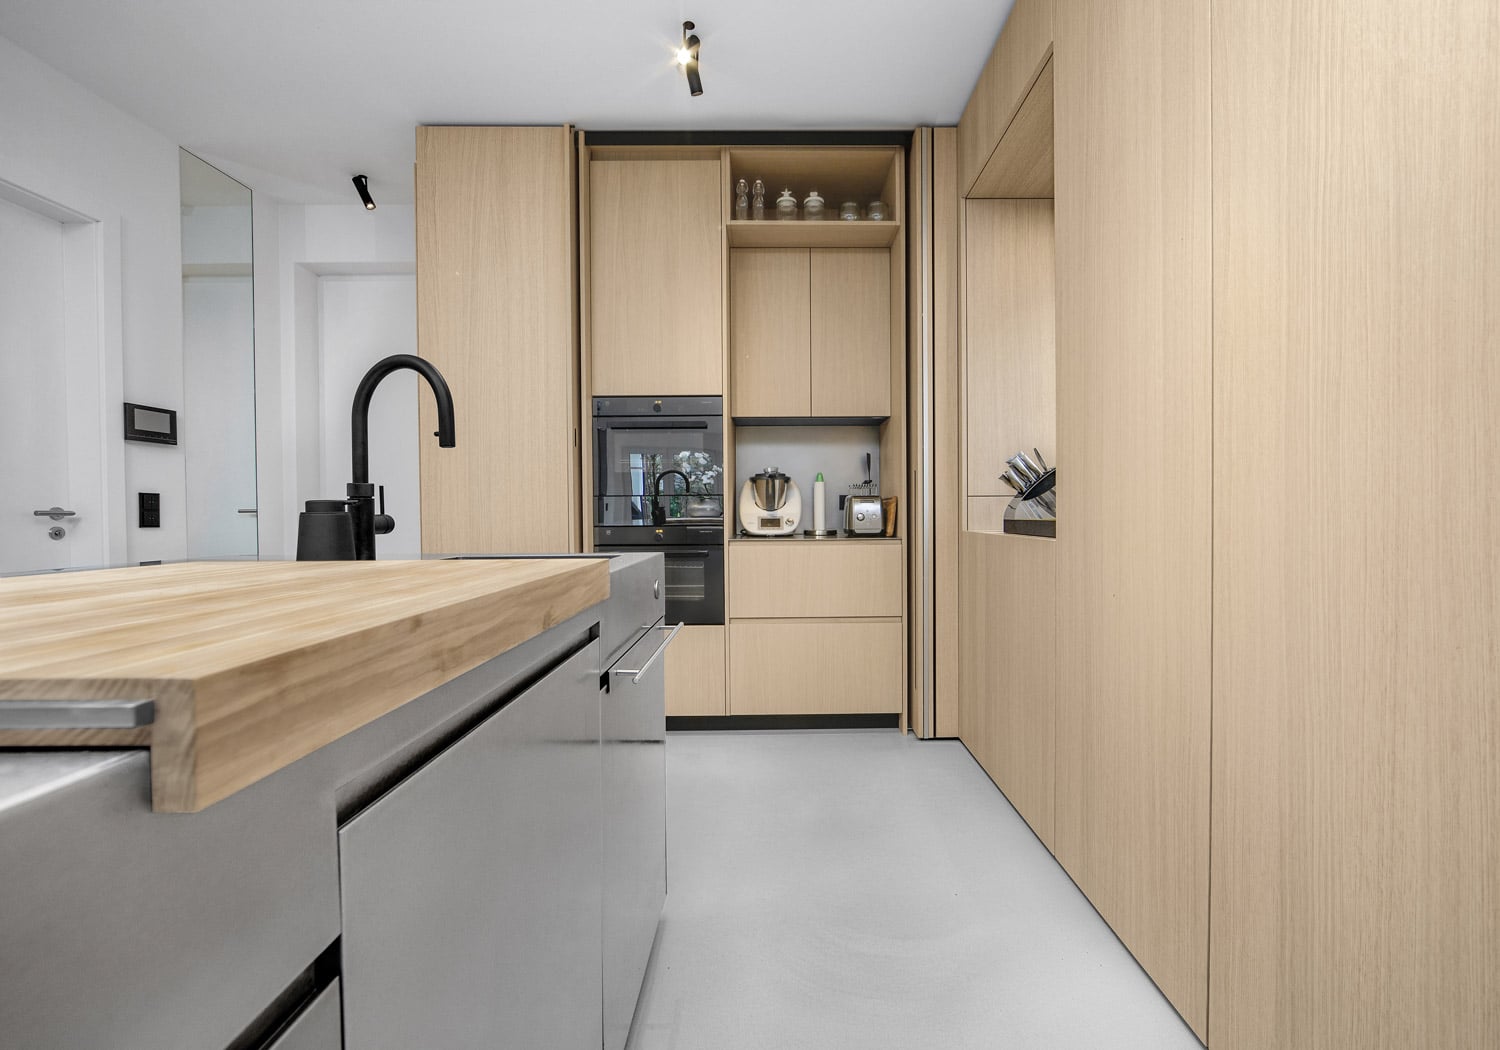 The right side of the unit features a bifolding pocket door to go with its slightly larger width. Each side is customized in functionality. Using the same finish in the interiors as in the exterior maintains the harmonious aesthetics of the kitchen even when the units are in use. 